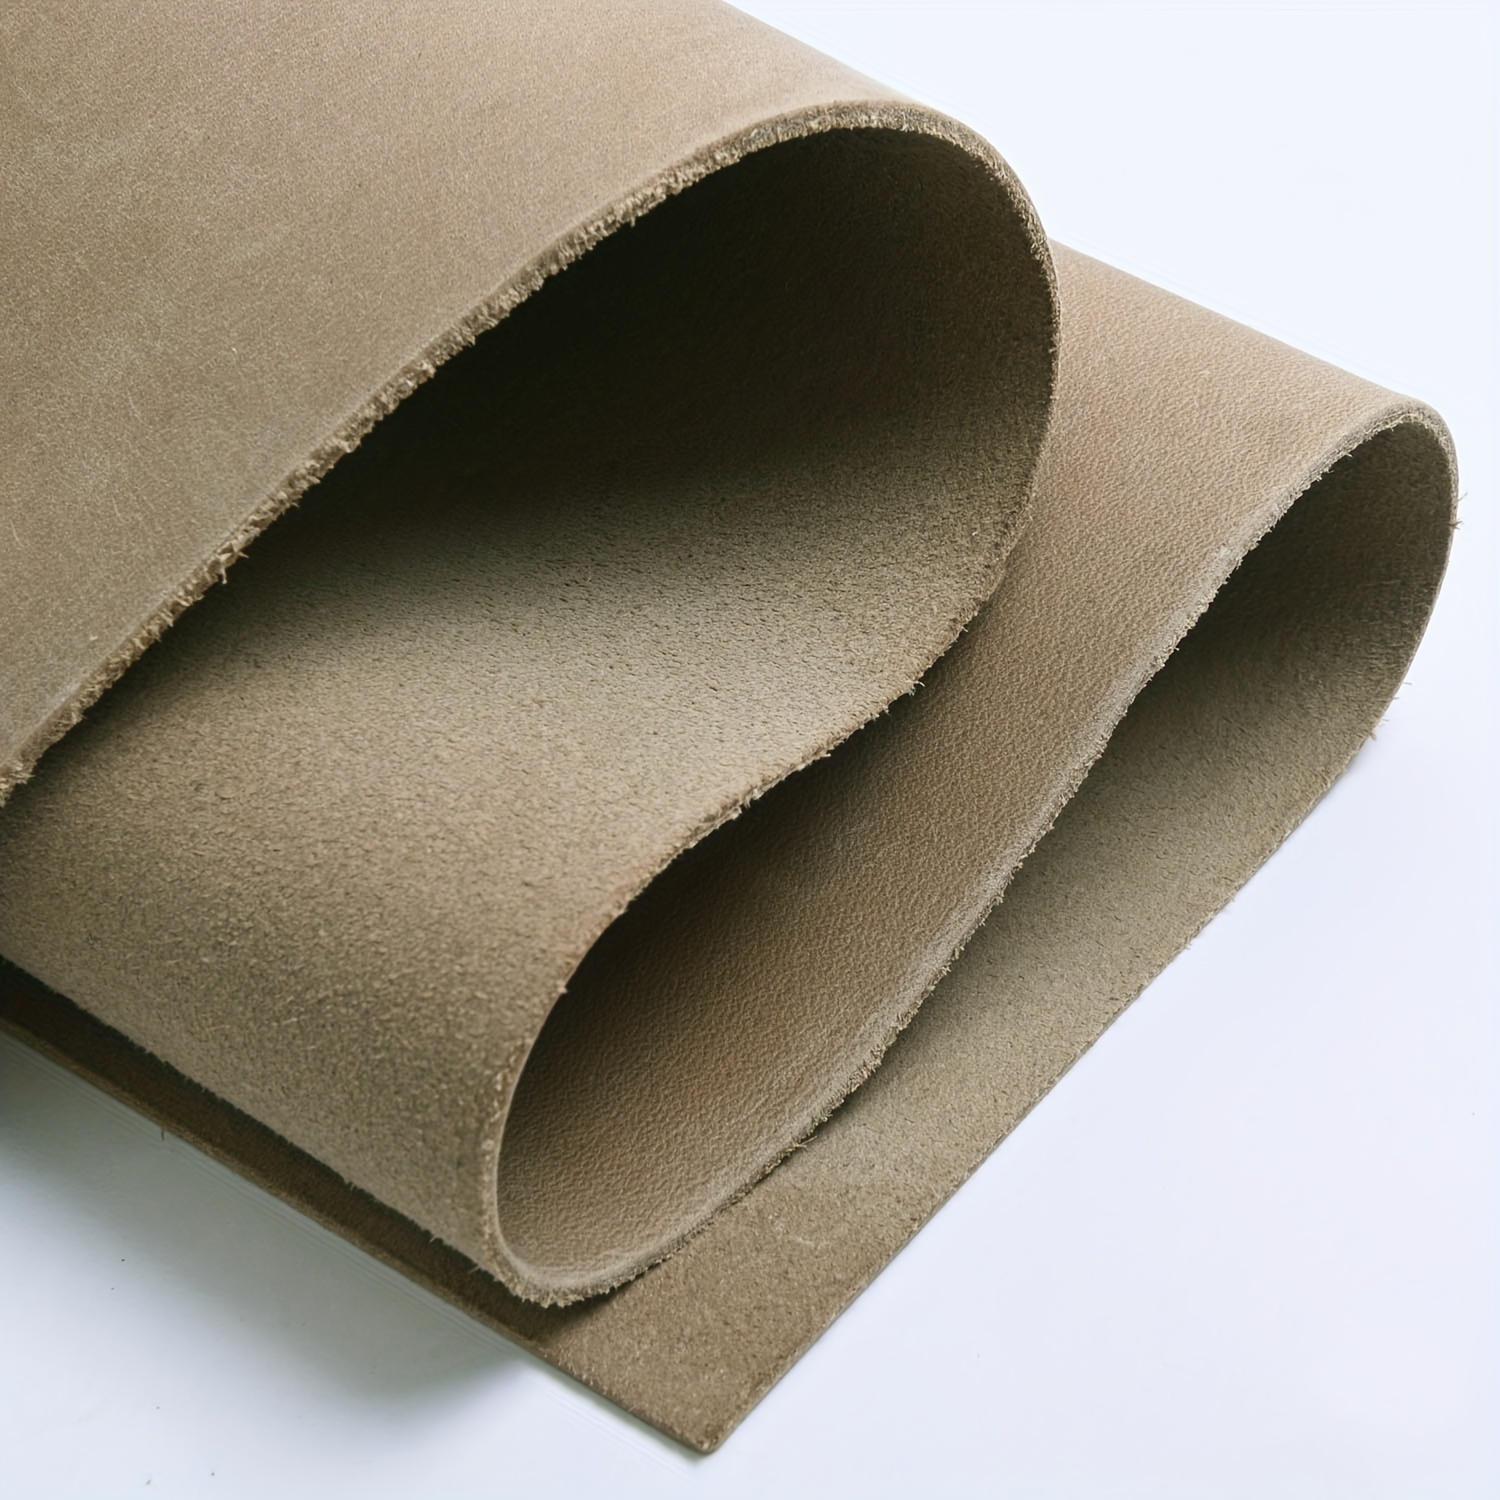  Genuine Leather Sheets for Crafts, Tooling Leather